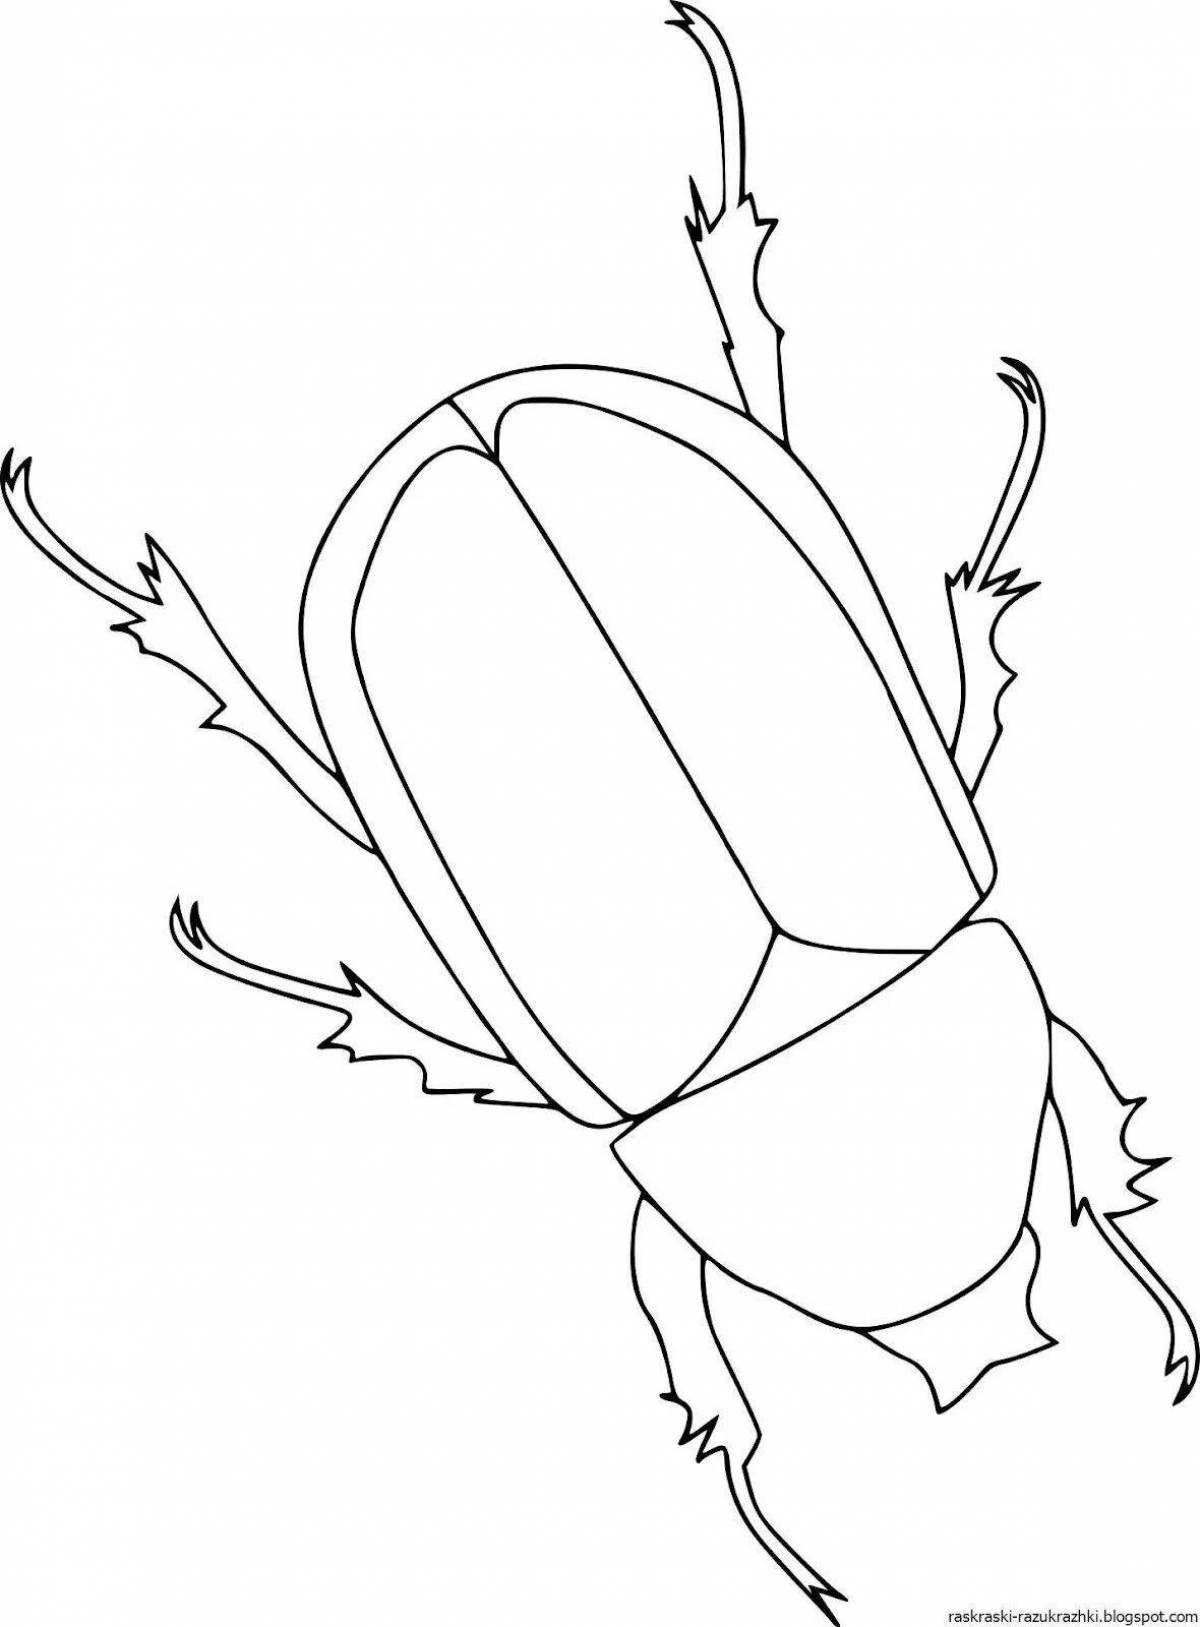 Great beetle coloring pages for 3-4 year olds